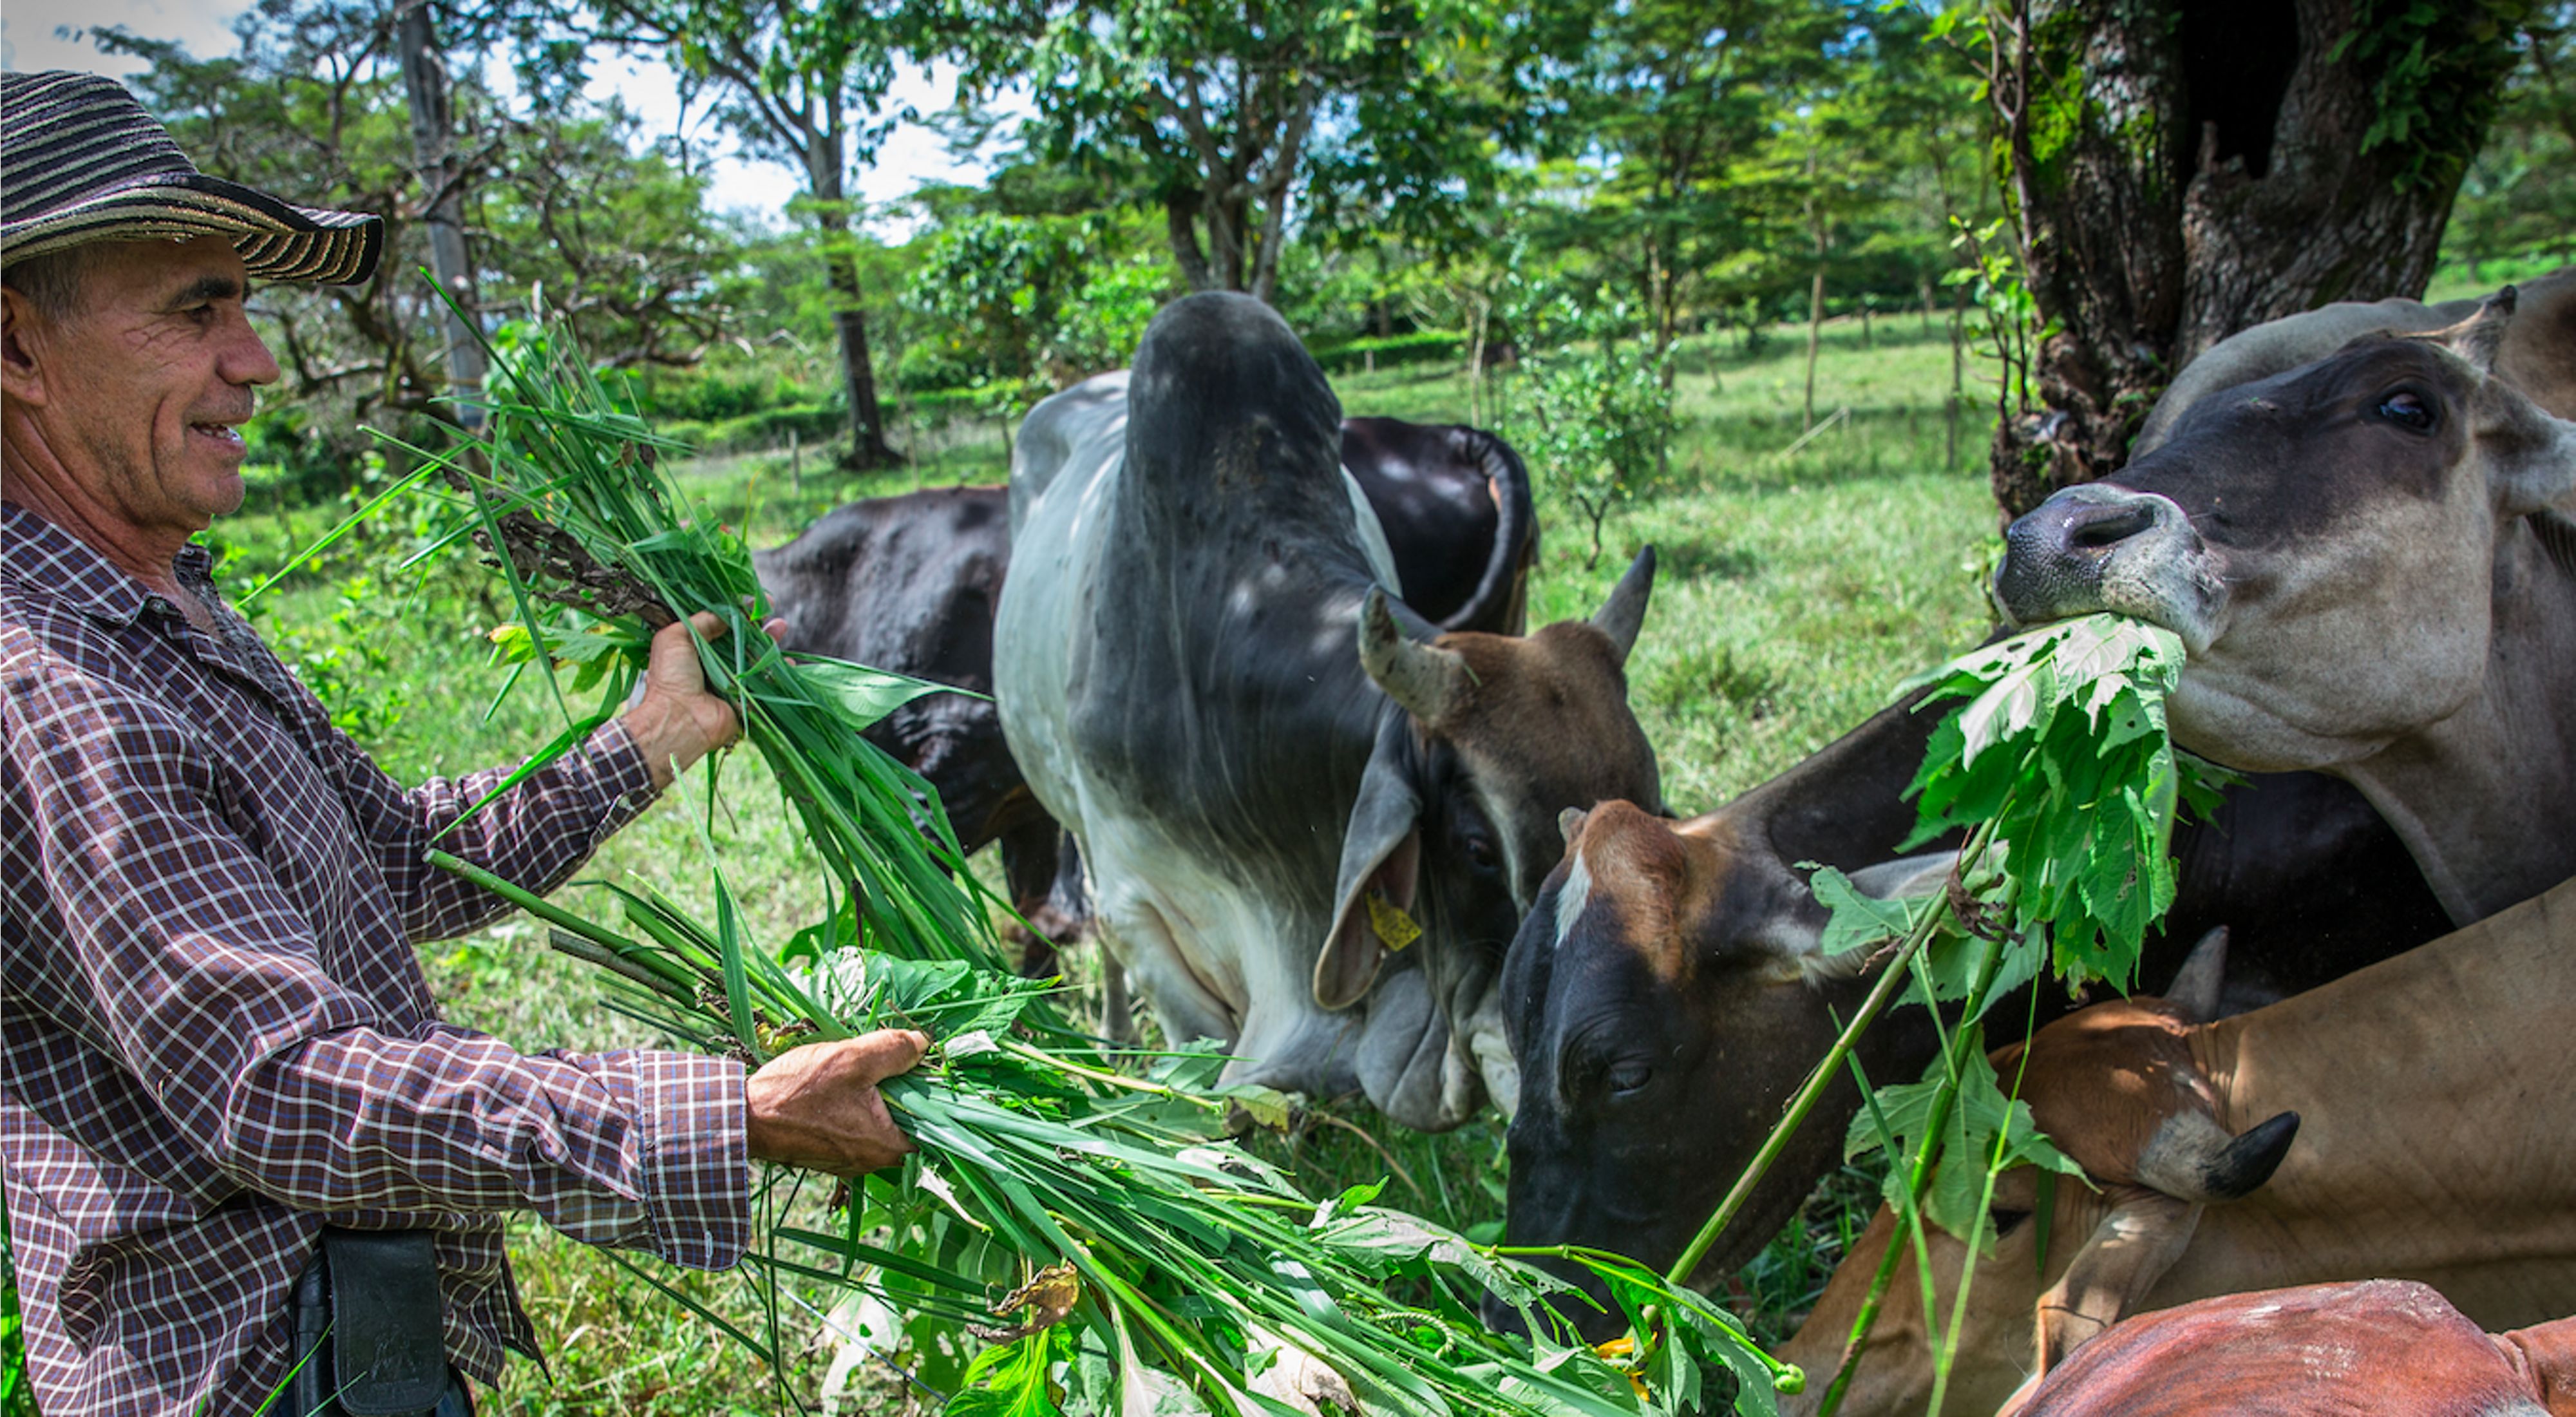 A farmer feeds greens to cattle in a lush pasture with trees.